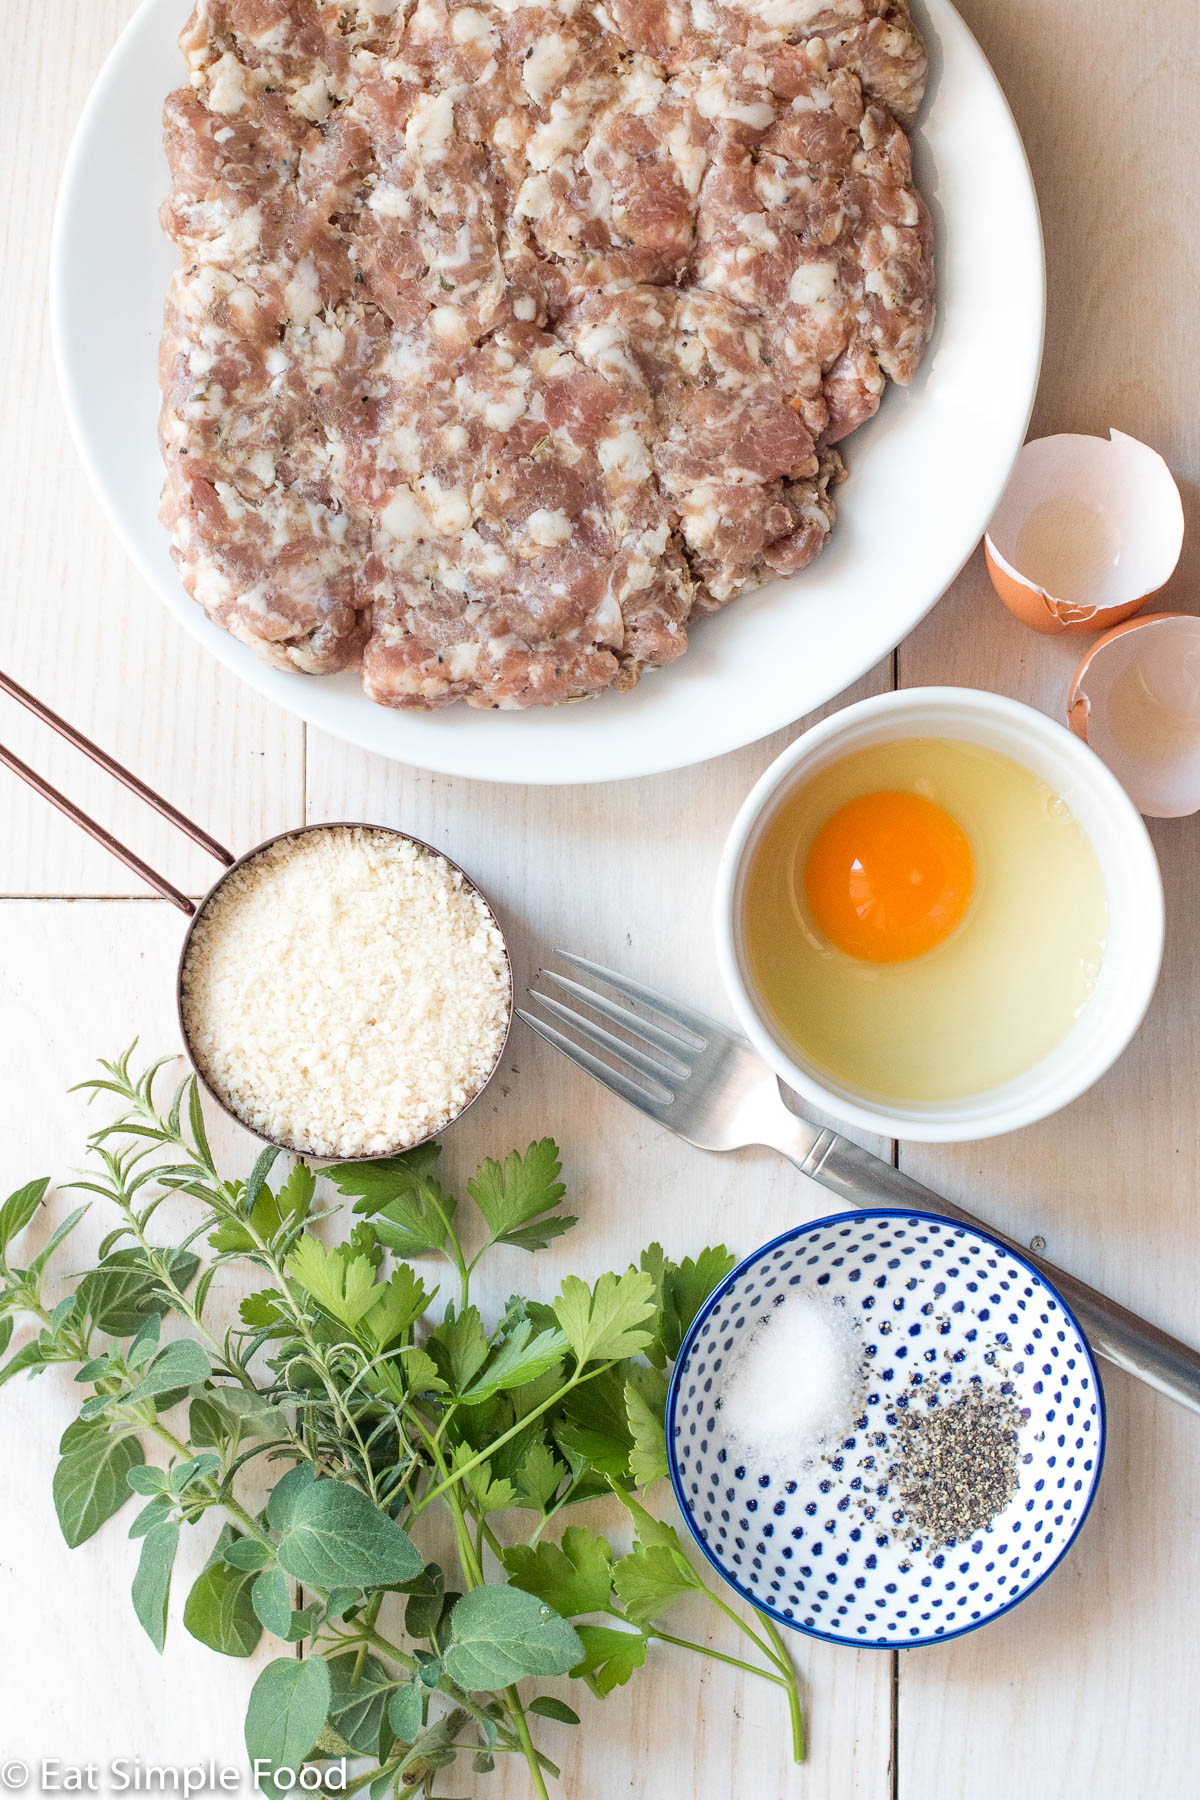 Ingredients on a white table: white plate of ground sausage, one cracked egg in a white bowl, ½ cup panko bread crumbs, container of salt and pepper, and fresh herbs (oregano, rosemary, parsley).